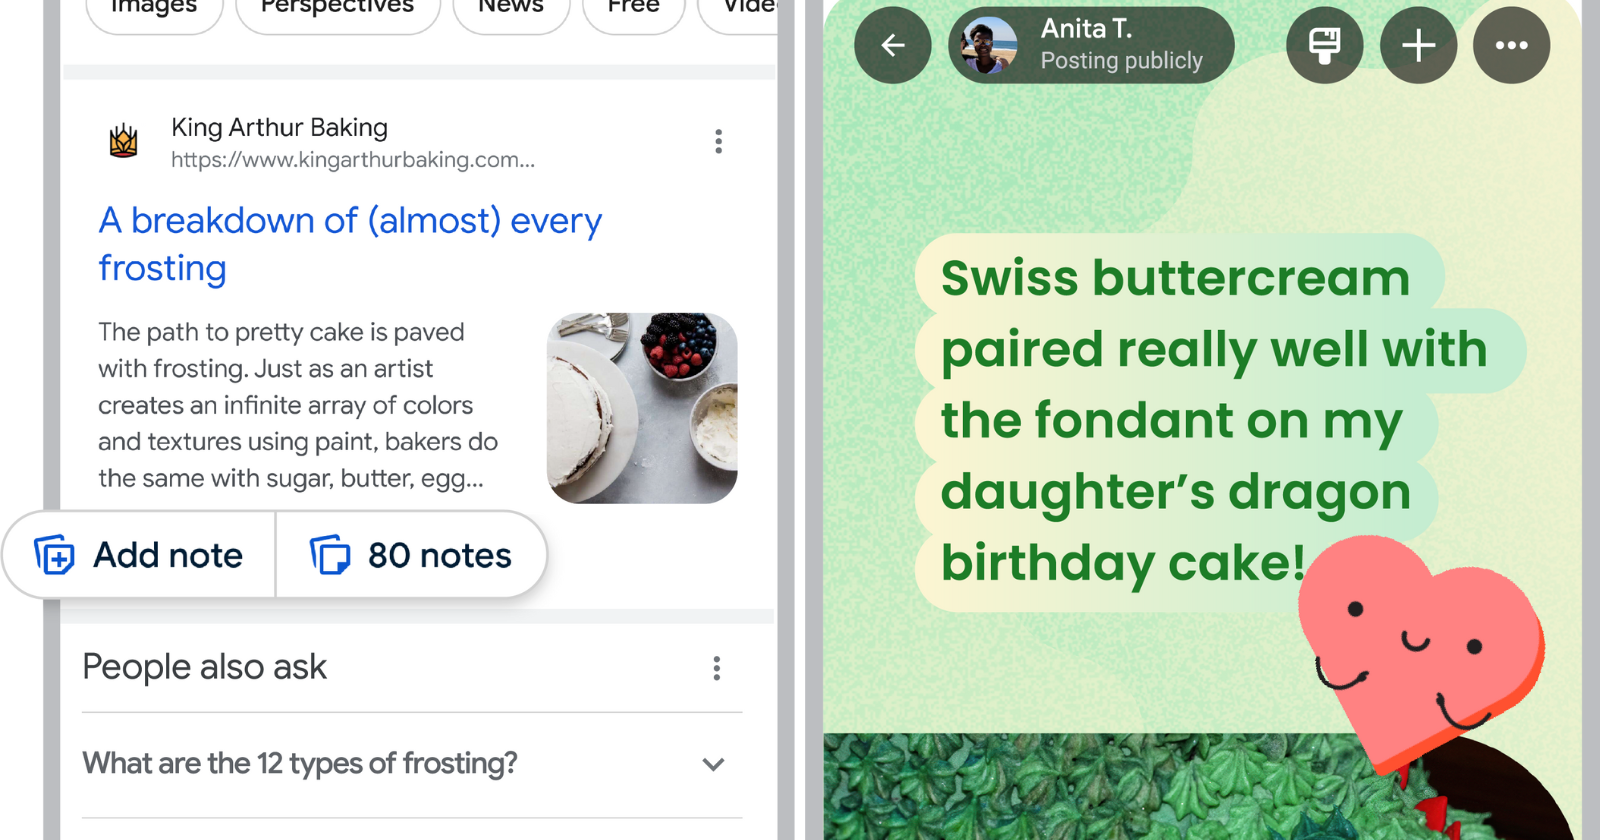 Google Launches “Notes” To Add User Comments In Search Results